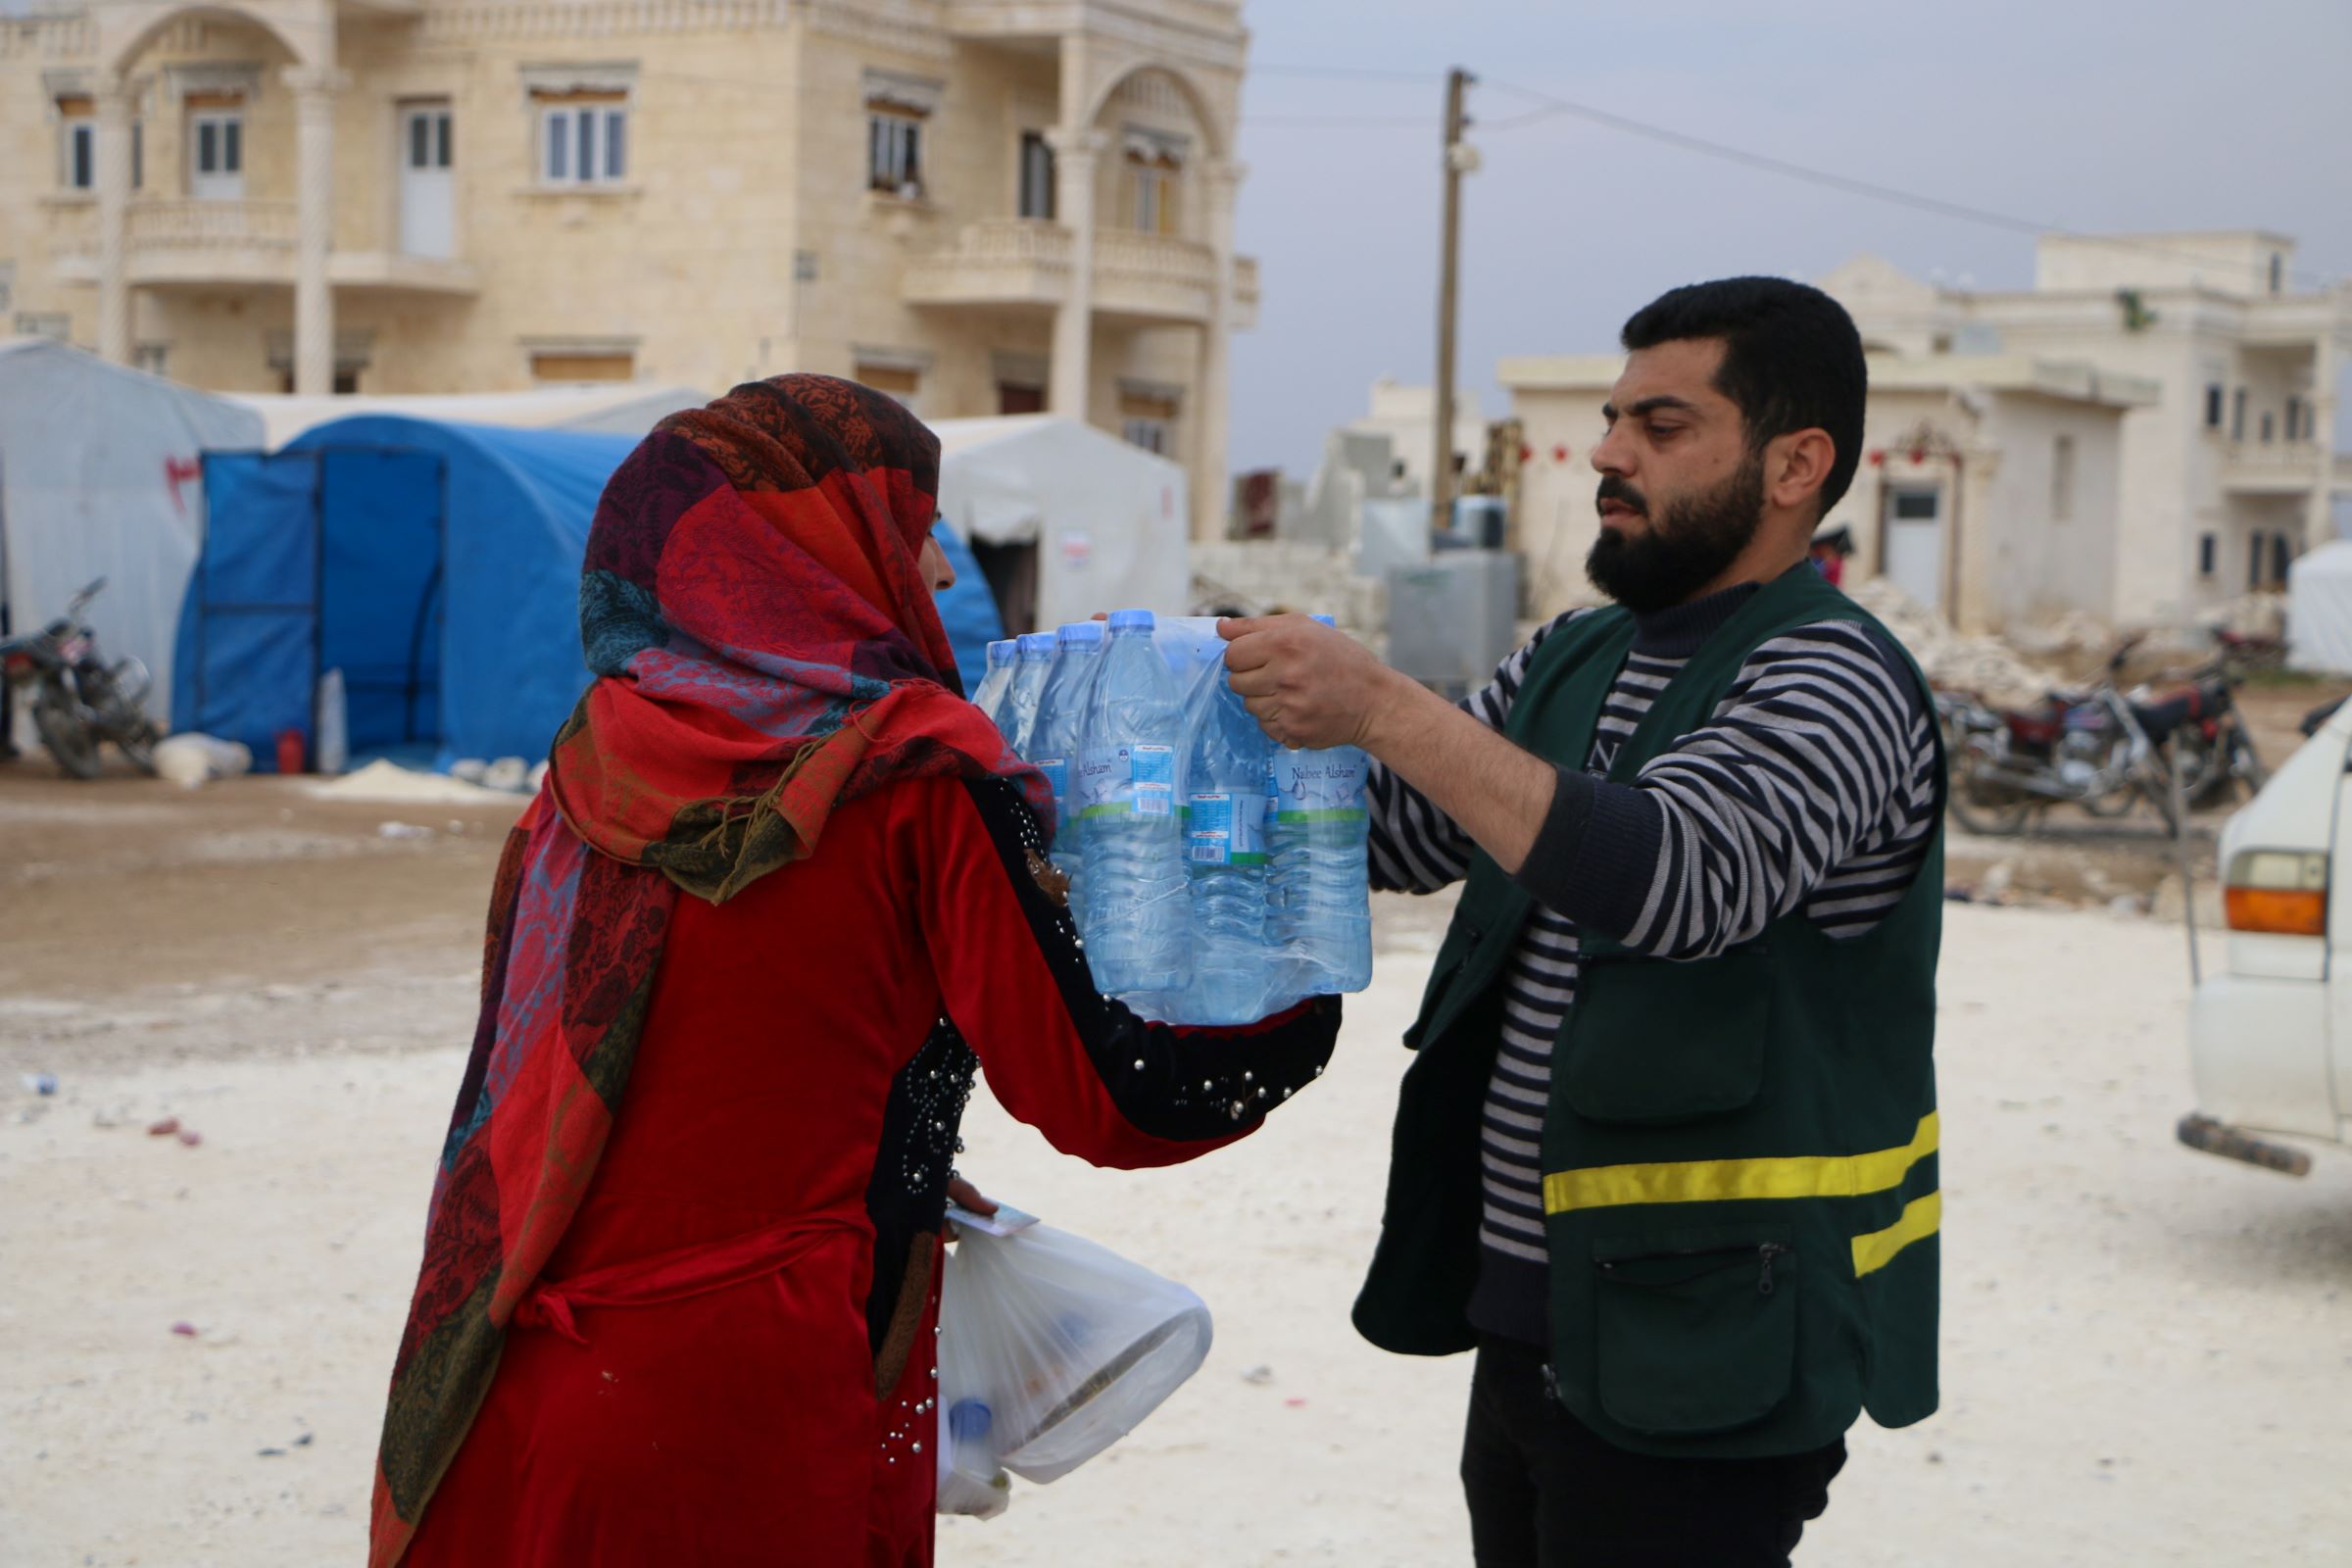 An emergency worker from our local partner organization Takaful Al-Sham hands a six-pack of water bottles to a woman. Tent shelters can be seen in the background.